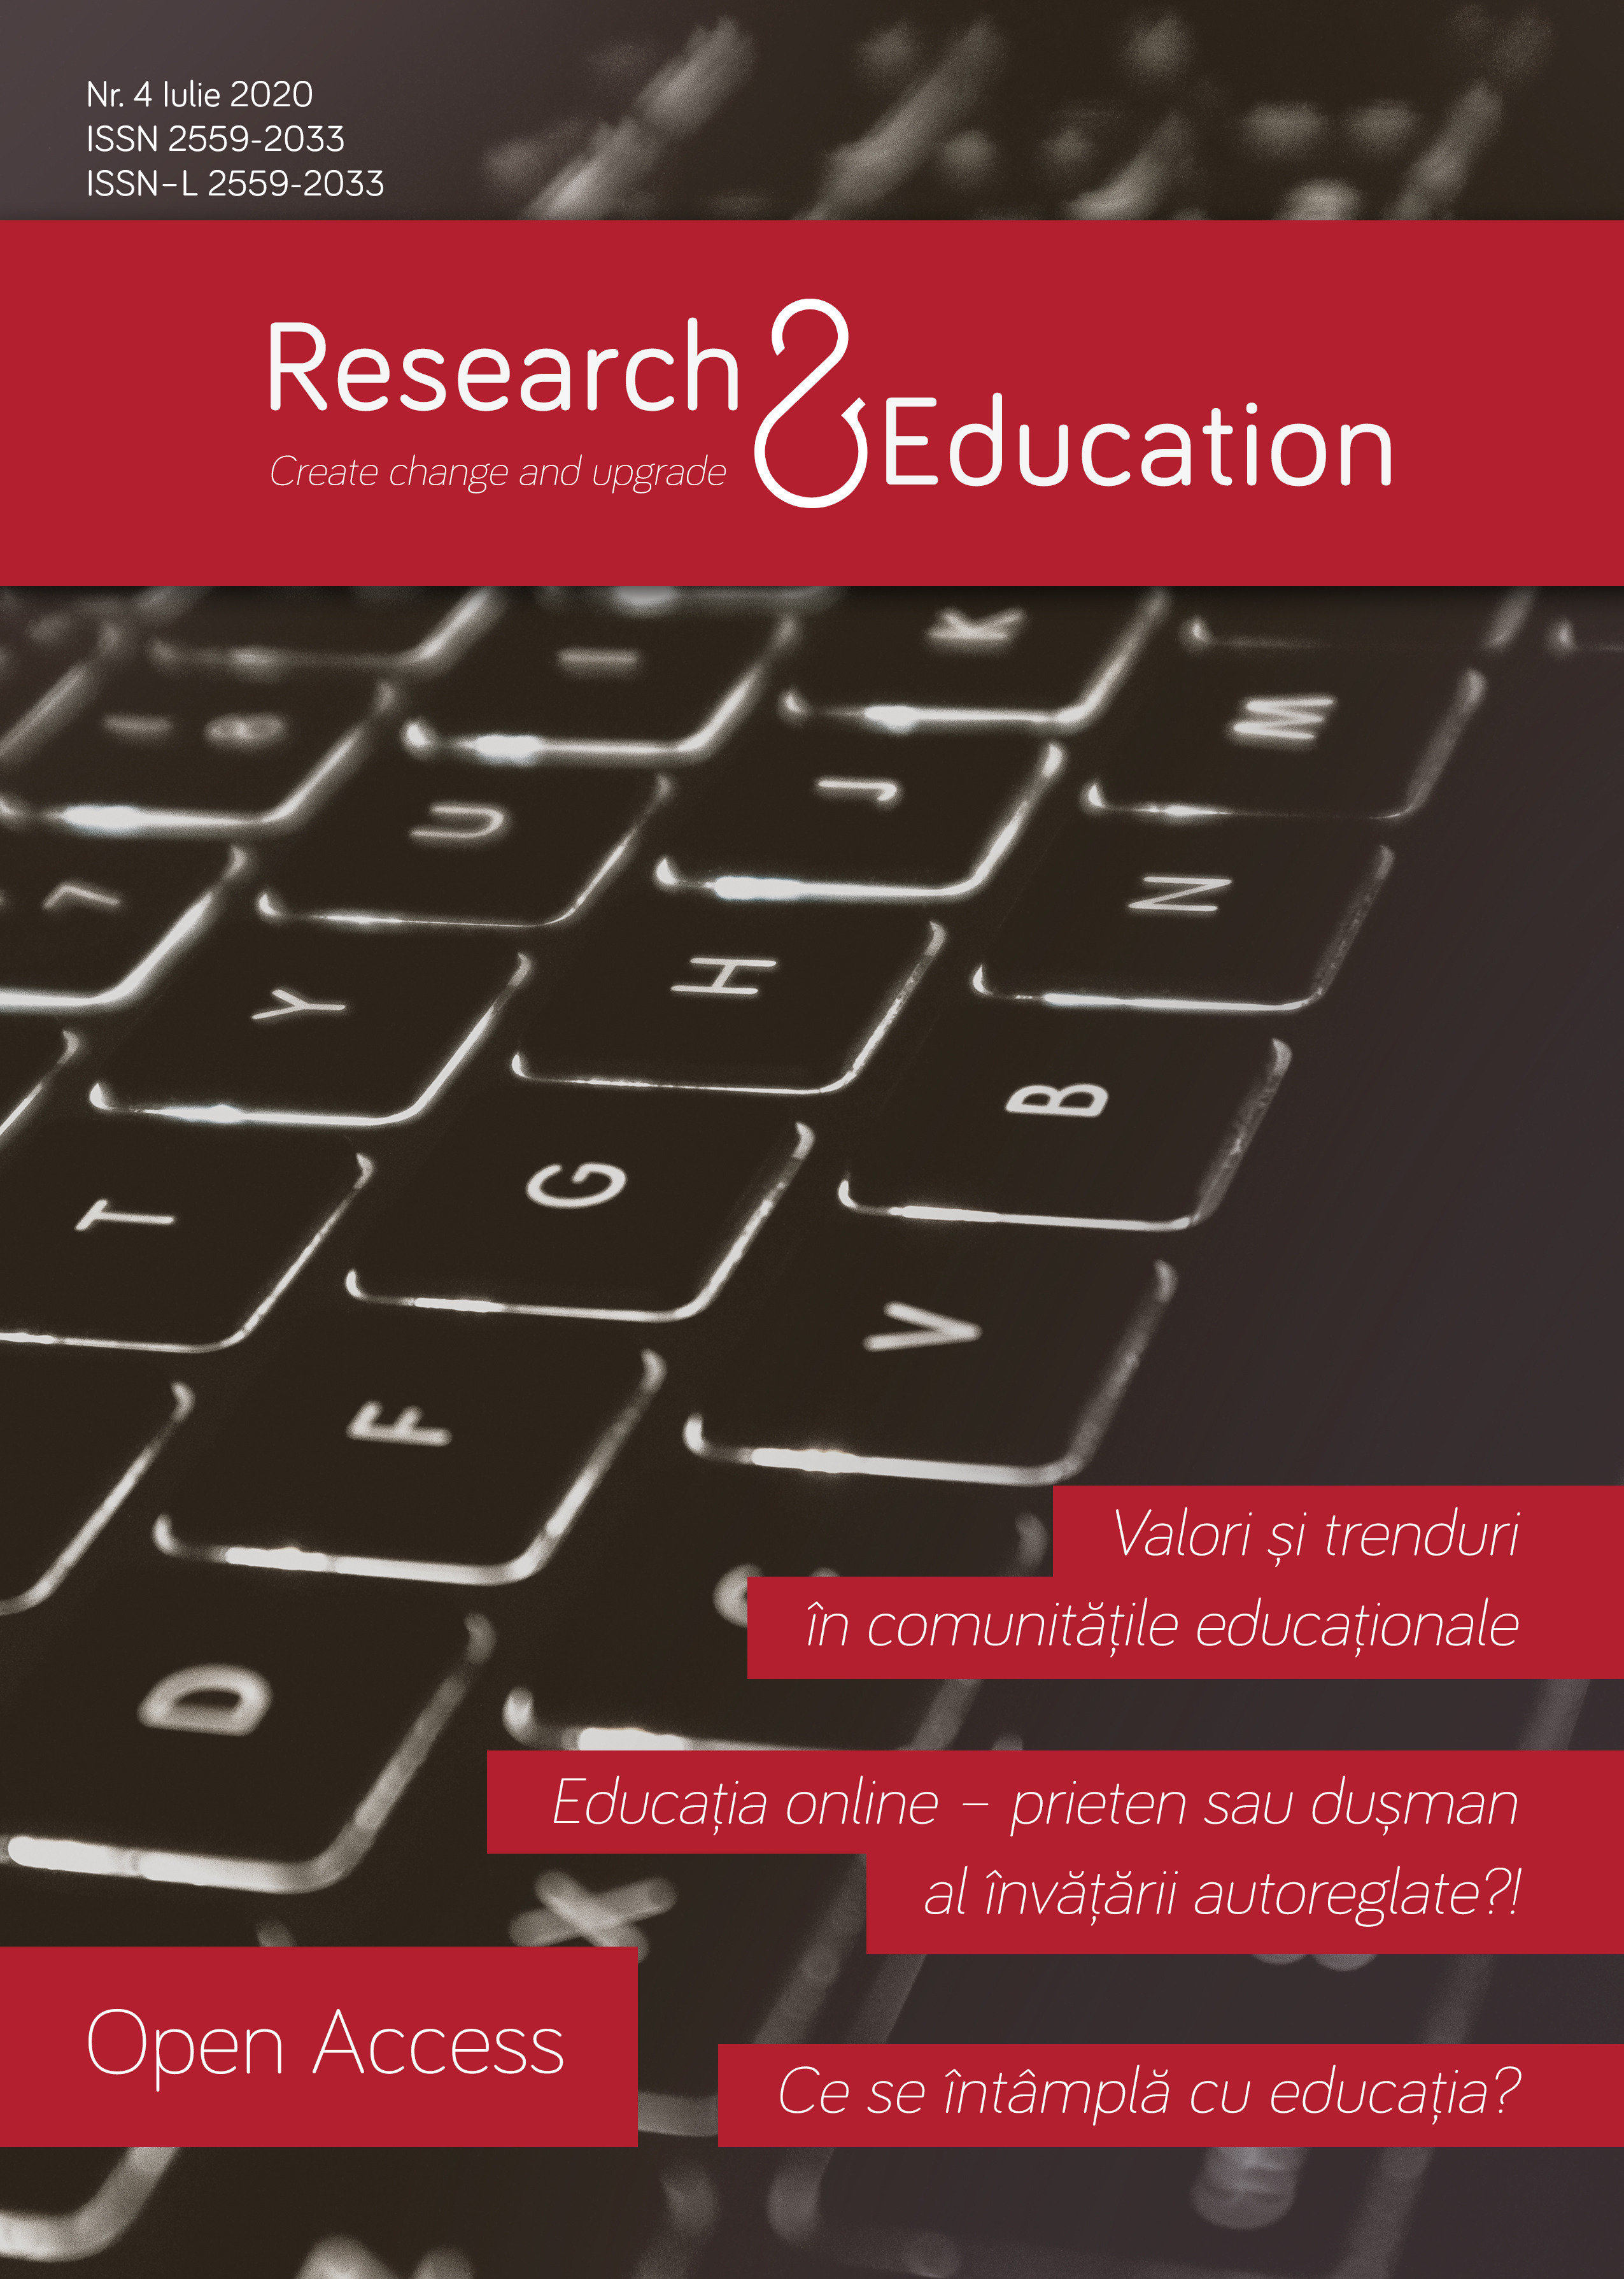 Values And Trends In Educational Communities Cover Image